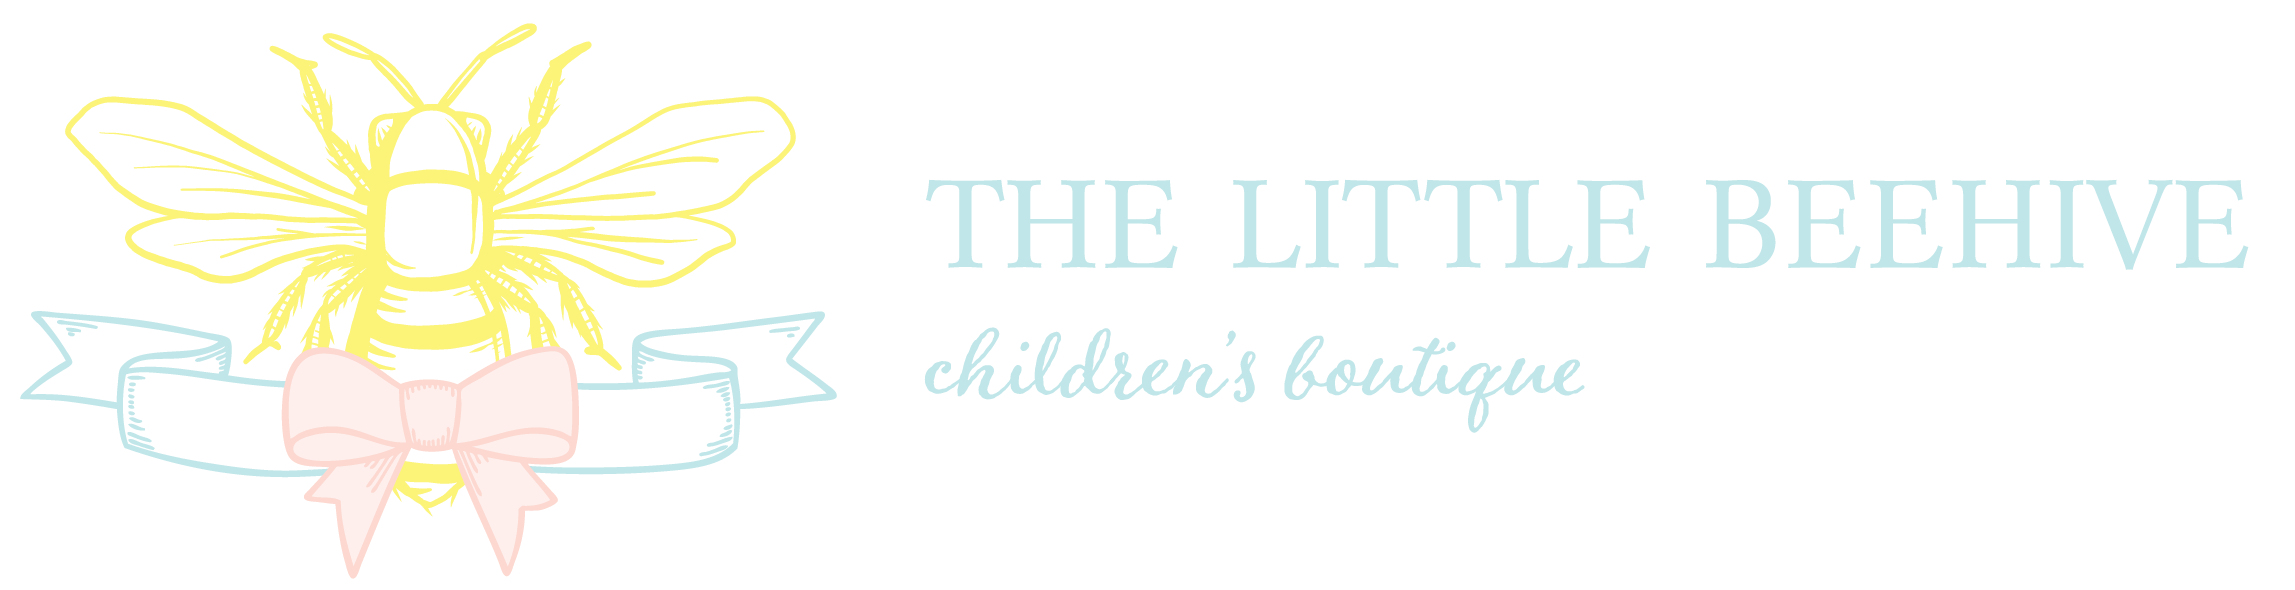 The Little Beehive